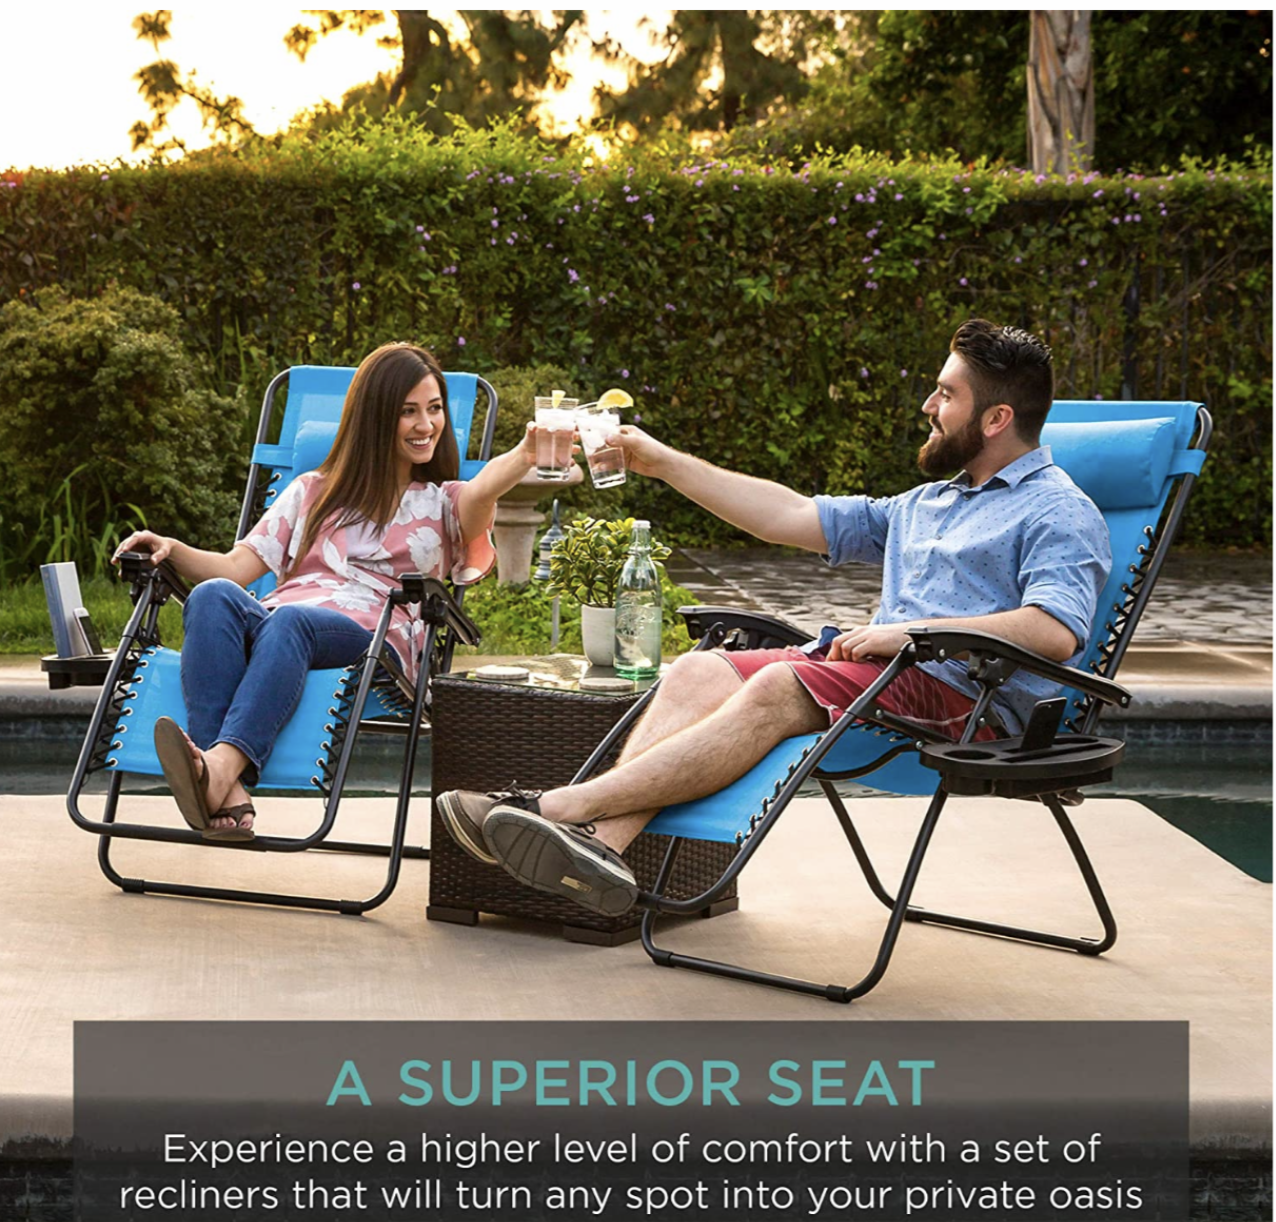 Copy of Set of two adjustable zero gravity lounge Chair Recliners for Patio, Pool w/Cup Holders -